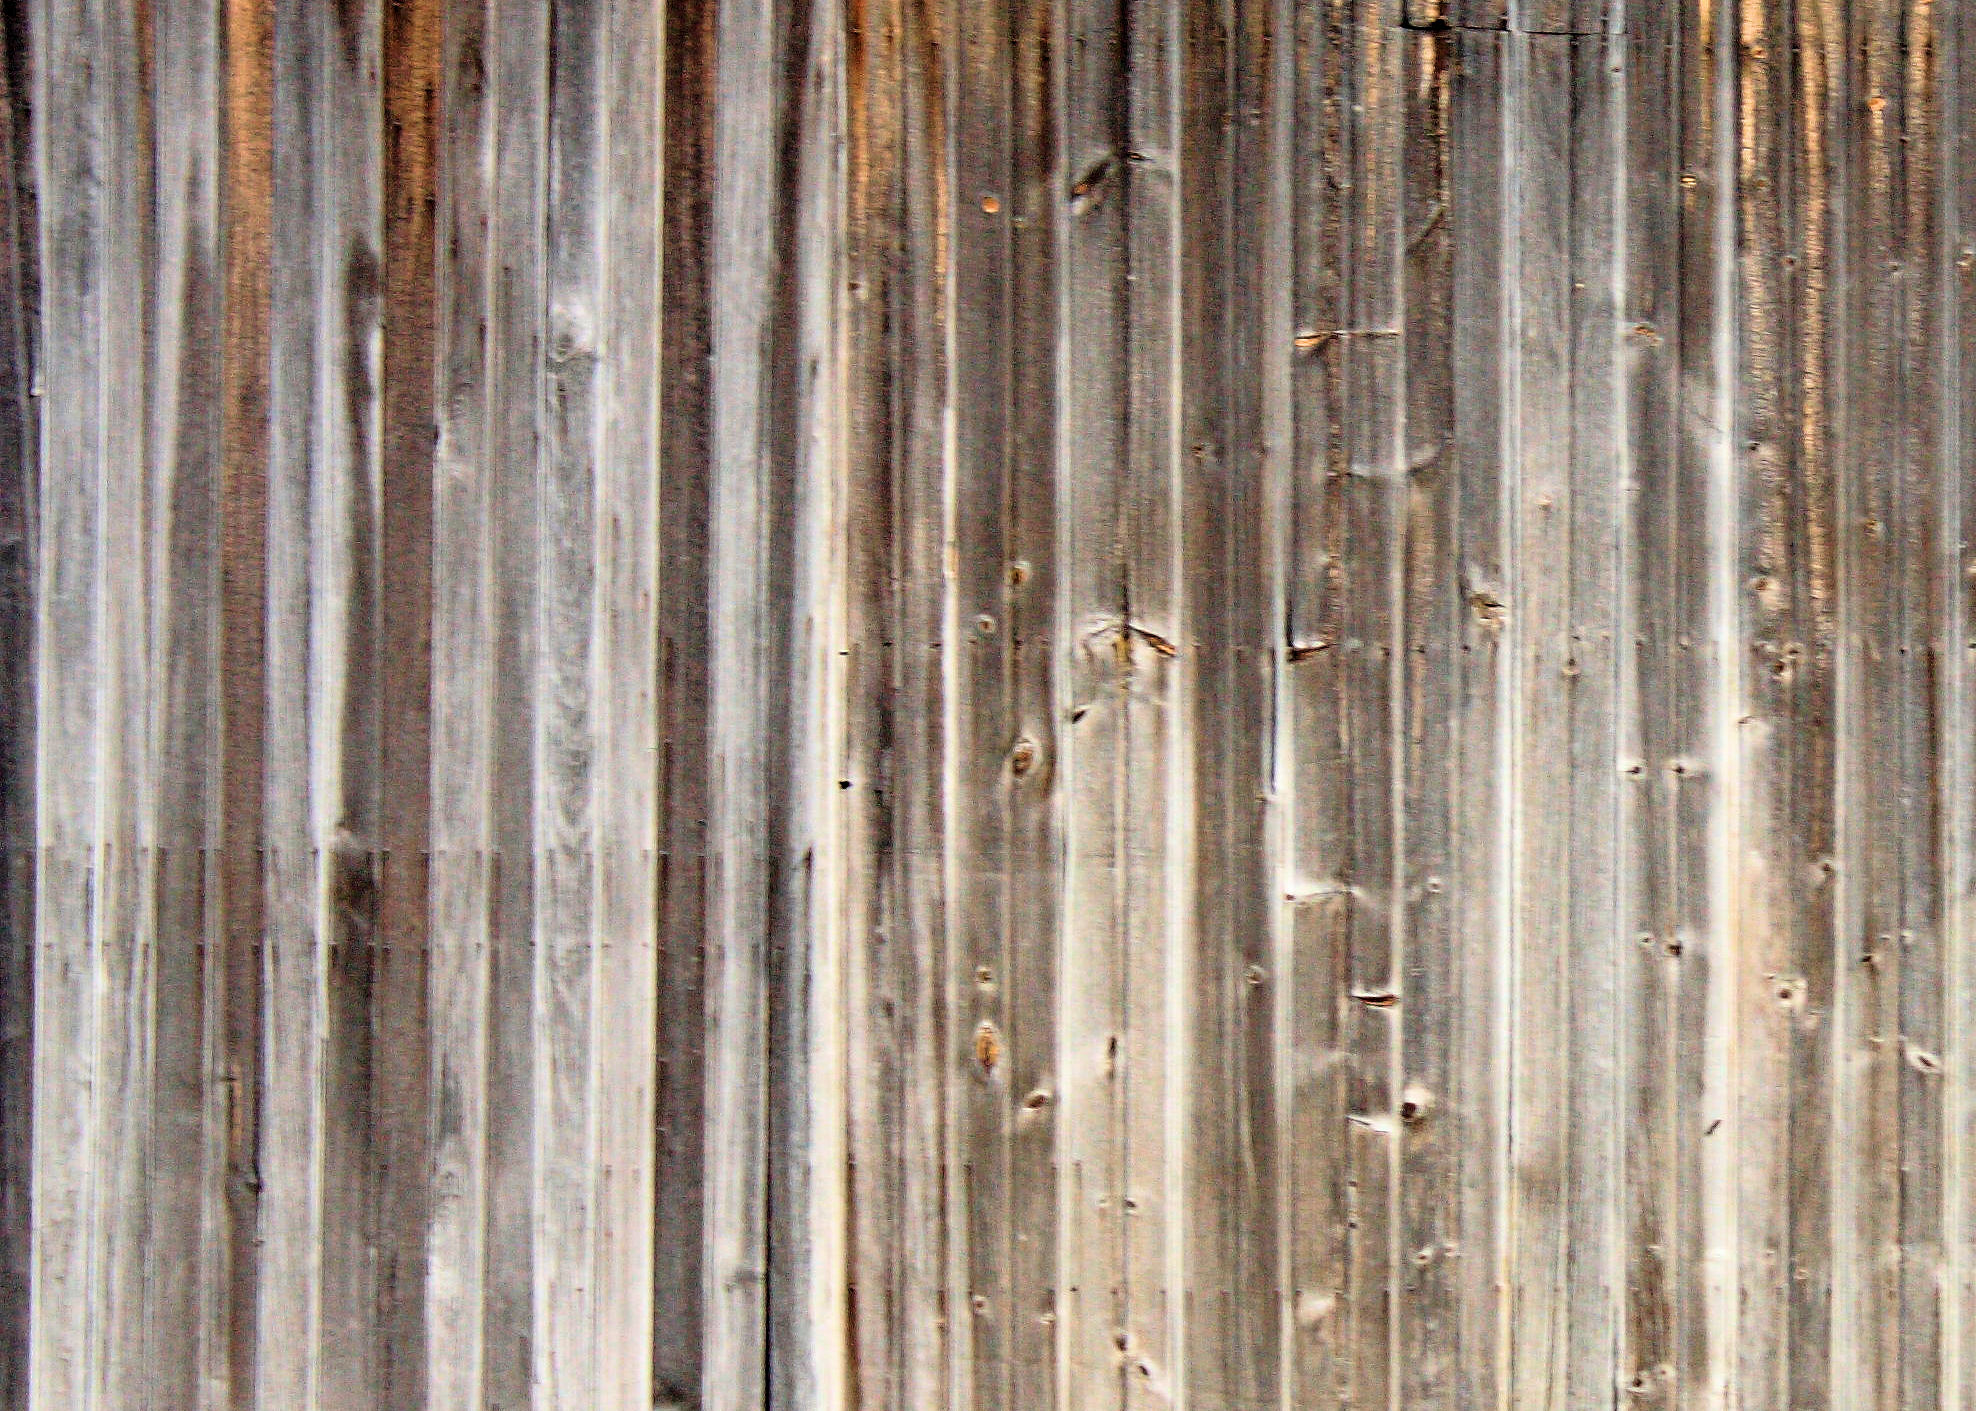 Rustic Barn Wood Background Recette